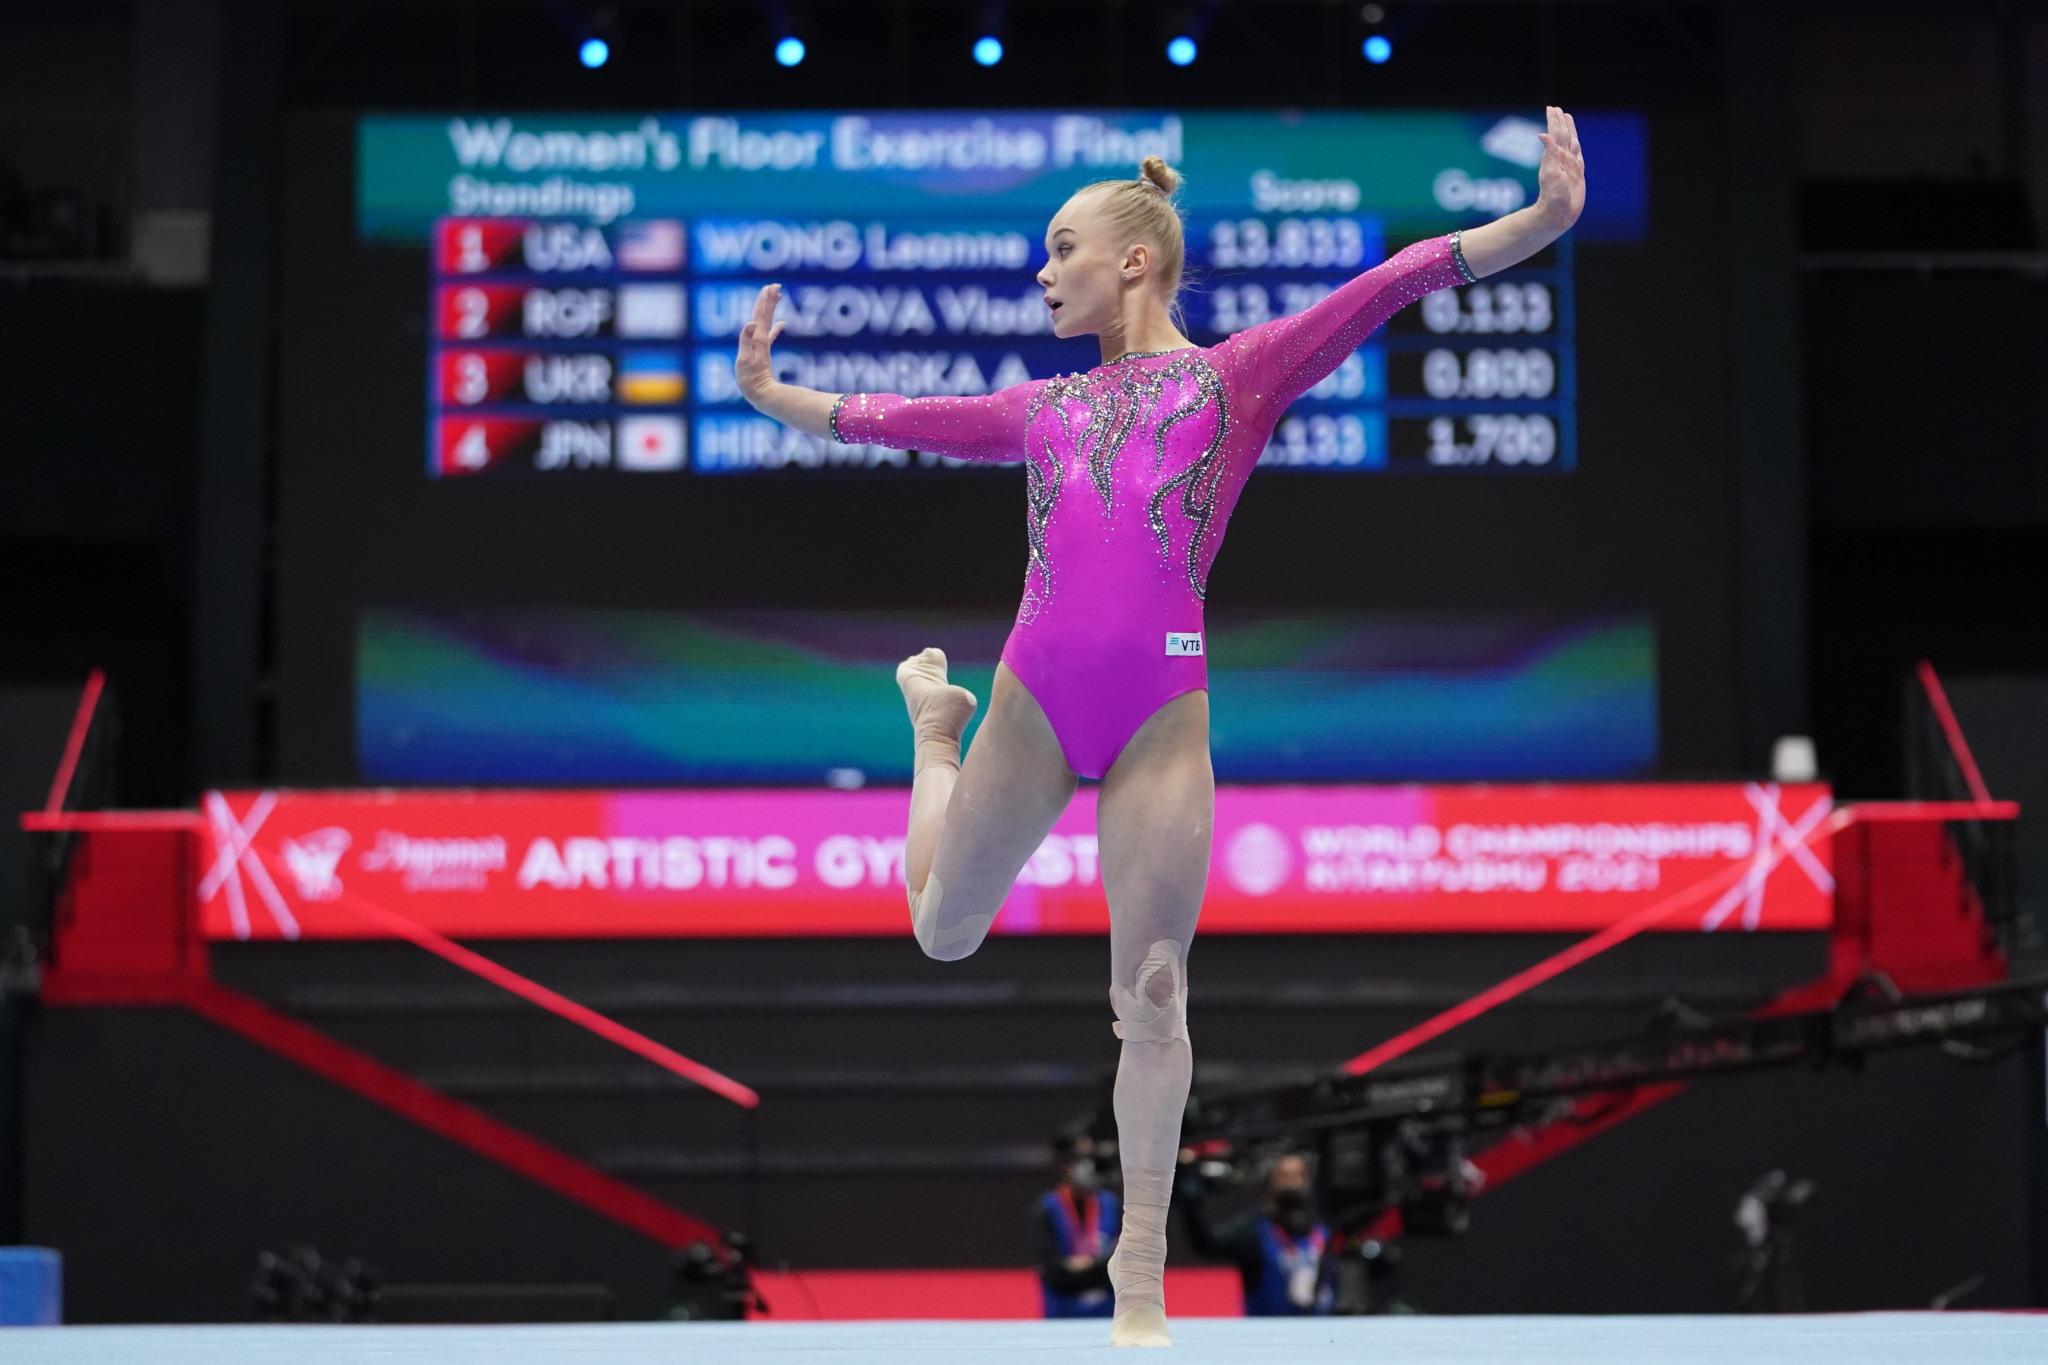 Russian gymnasts preparing for major events with eye on Paris 2024